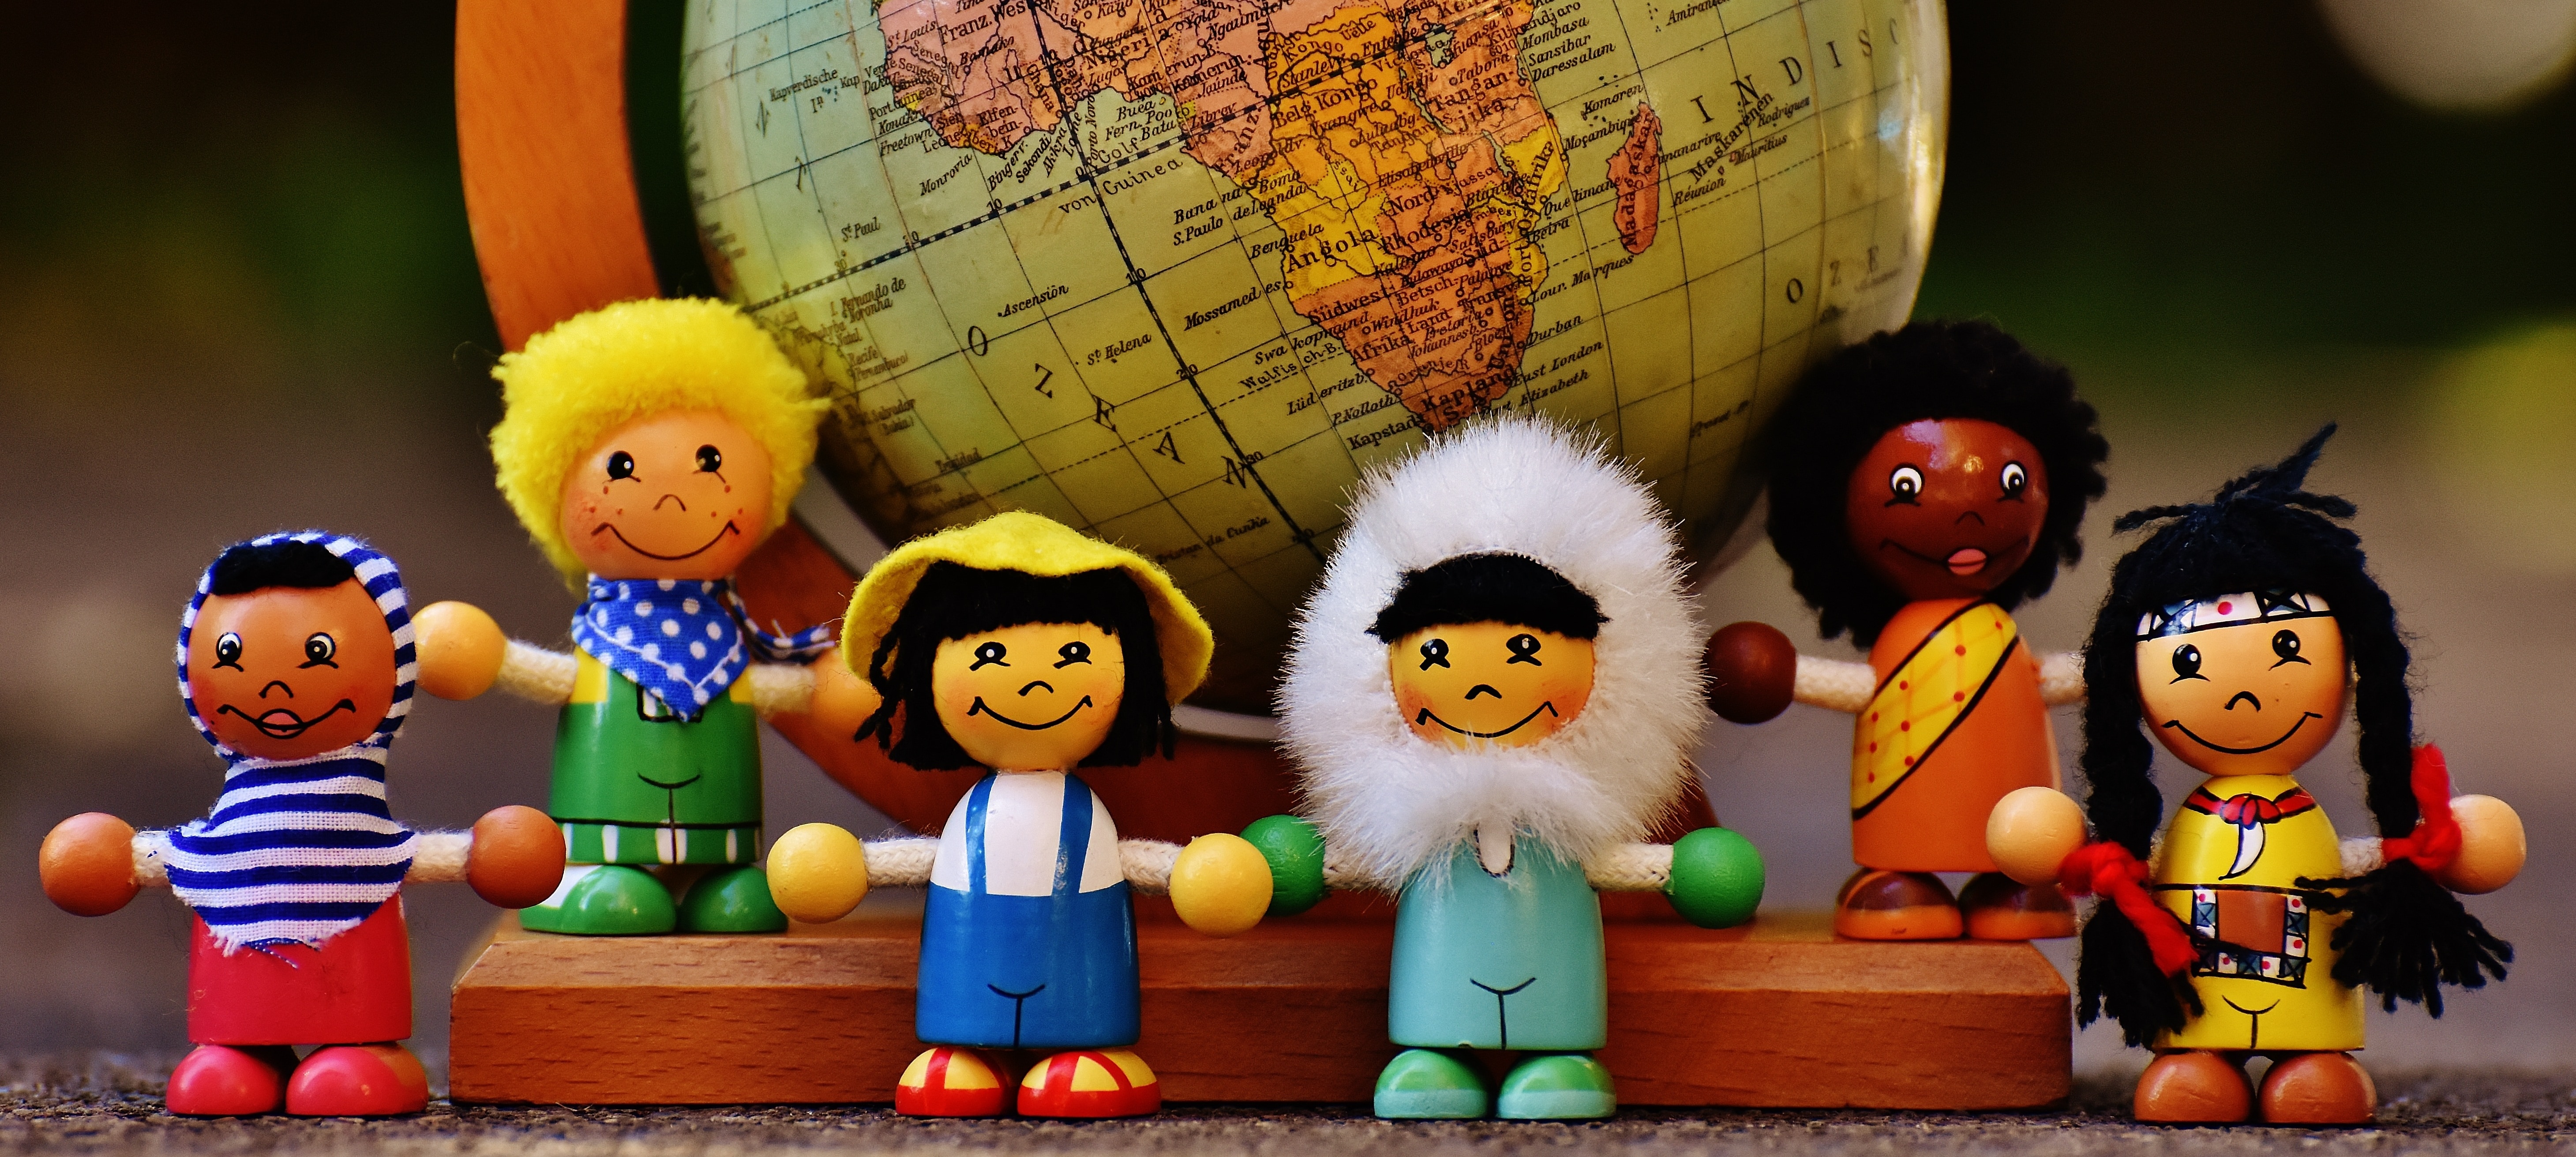 children in the world wooden mini figs and globe